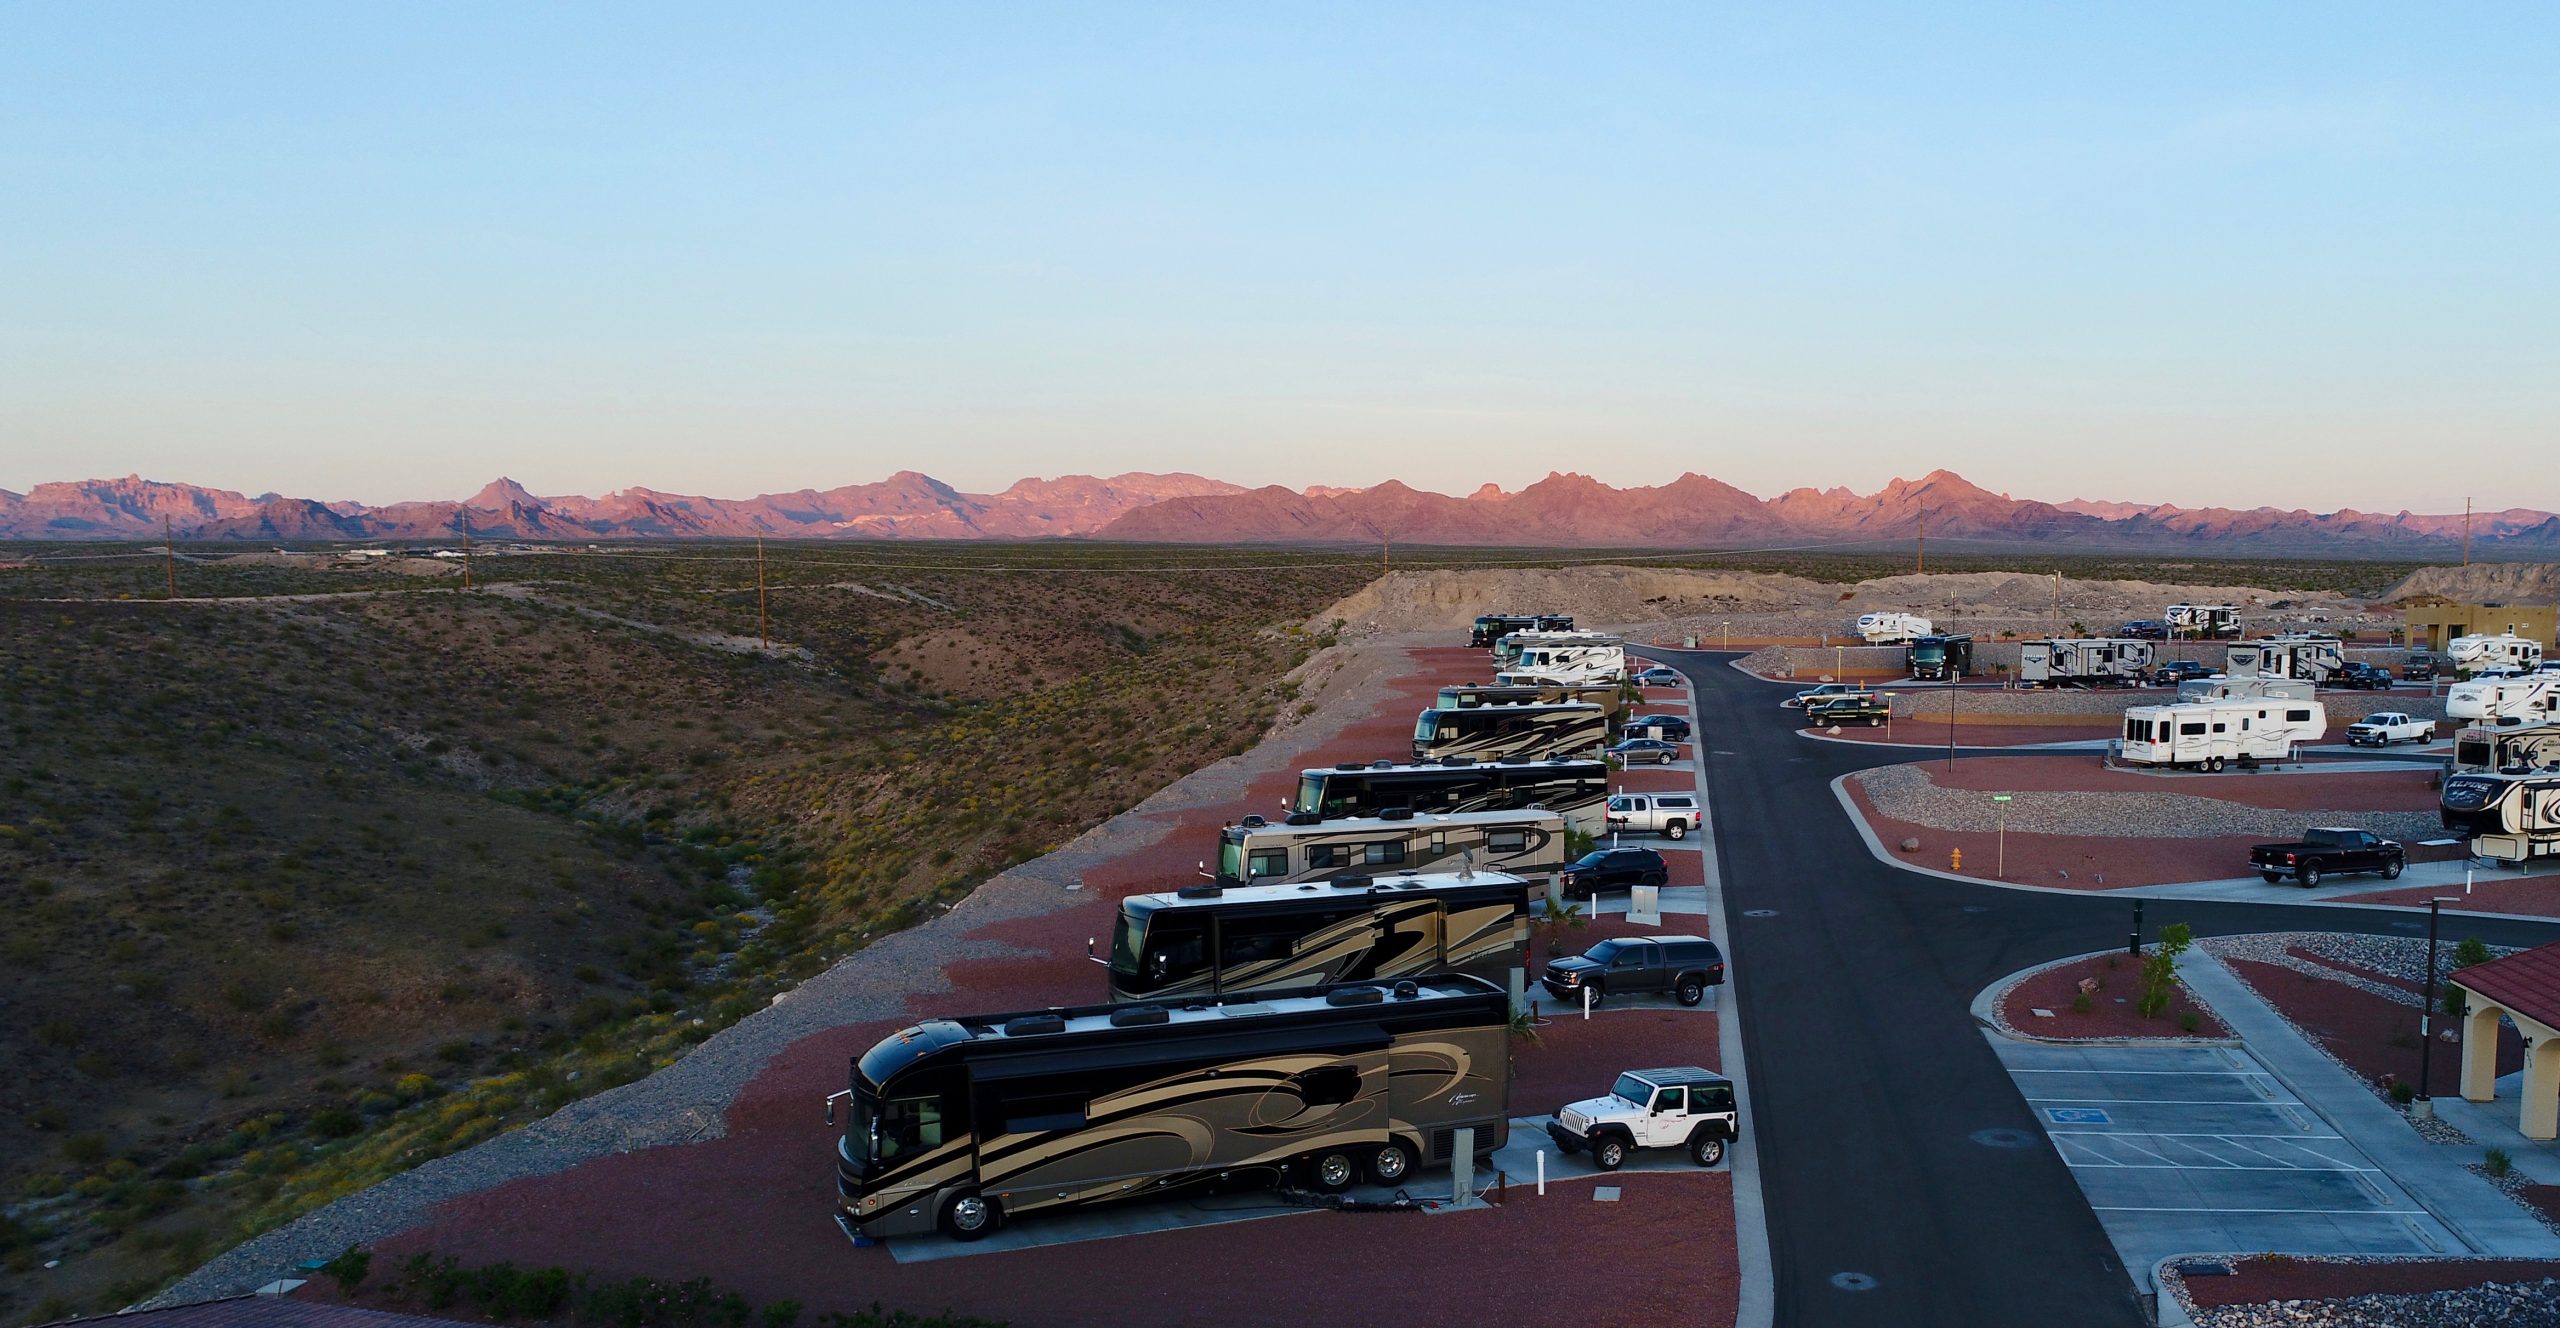 Drone shot of RVs parked in a row in a desert RV park.